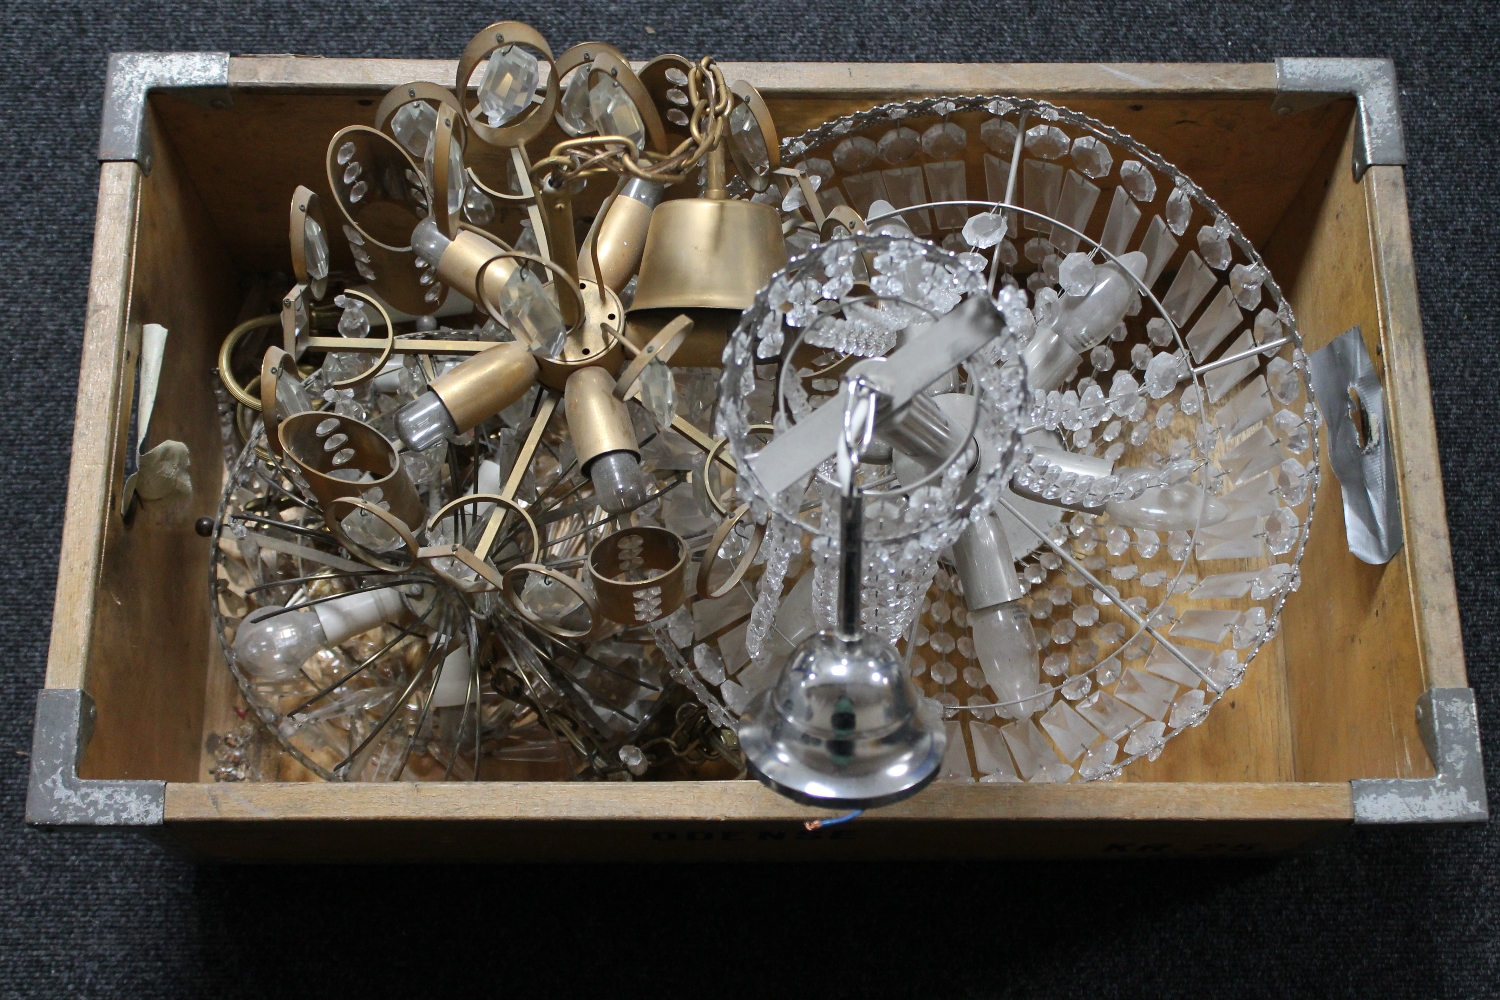 A crate containing three assorted light fittings with glass drops